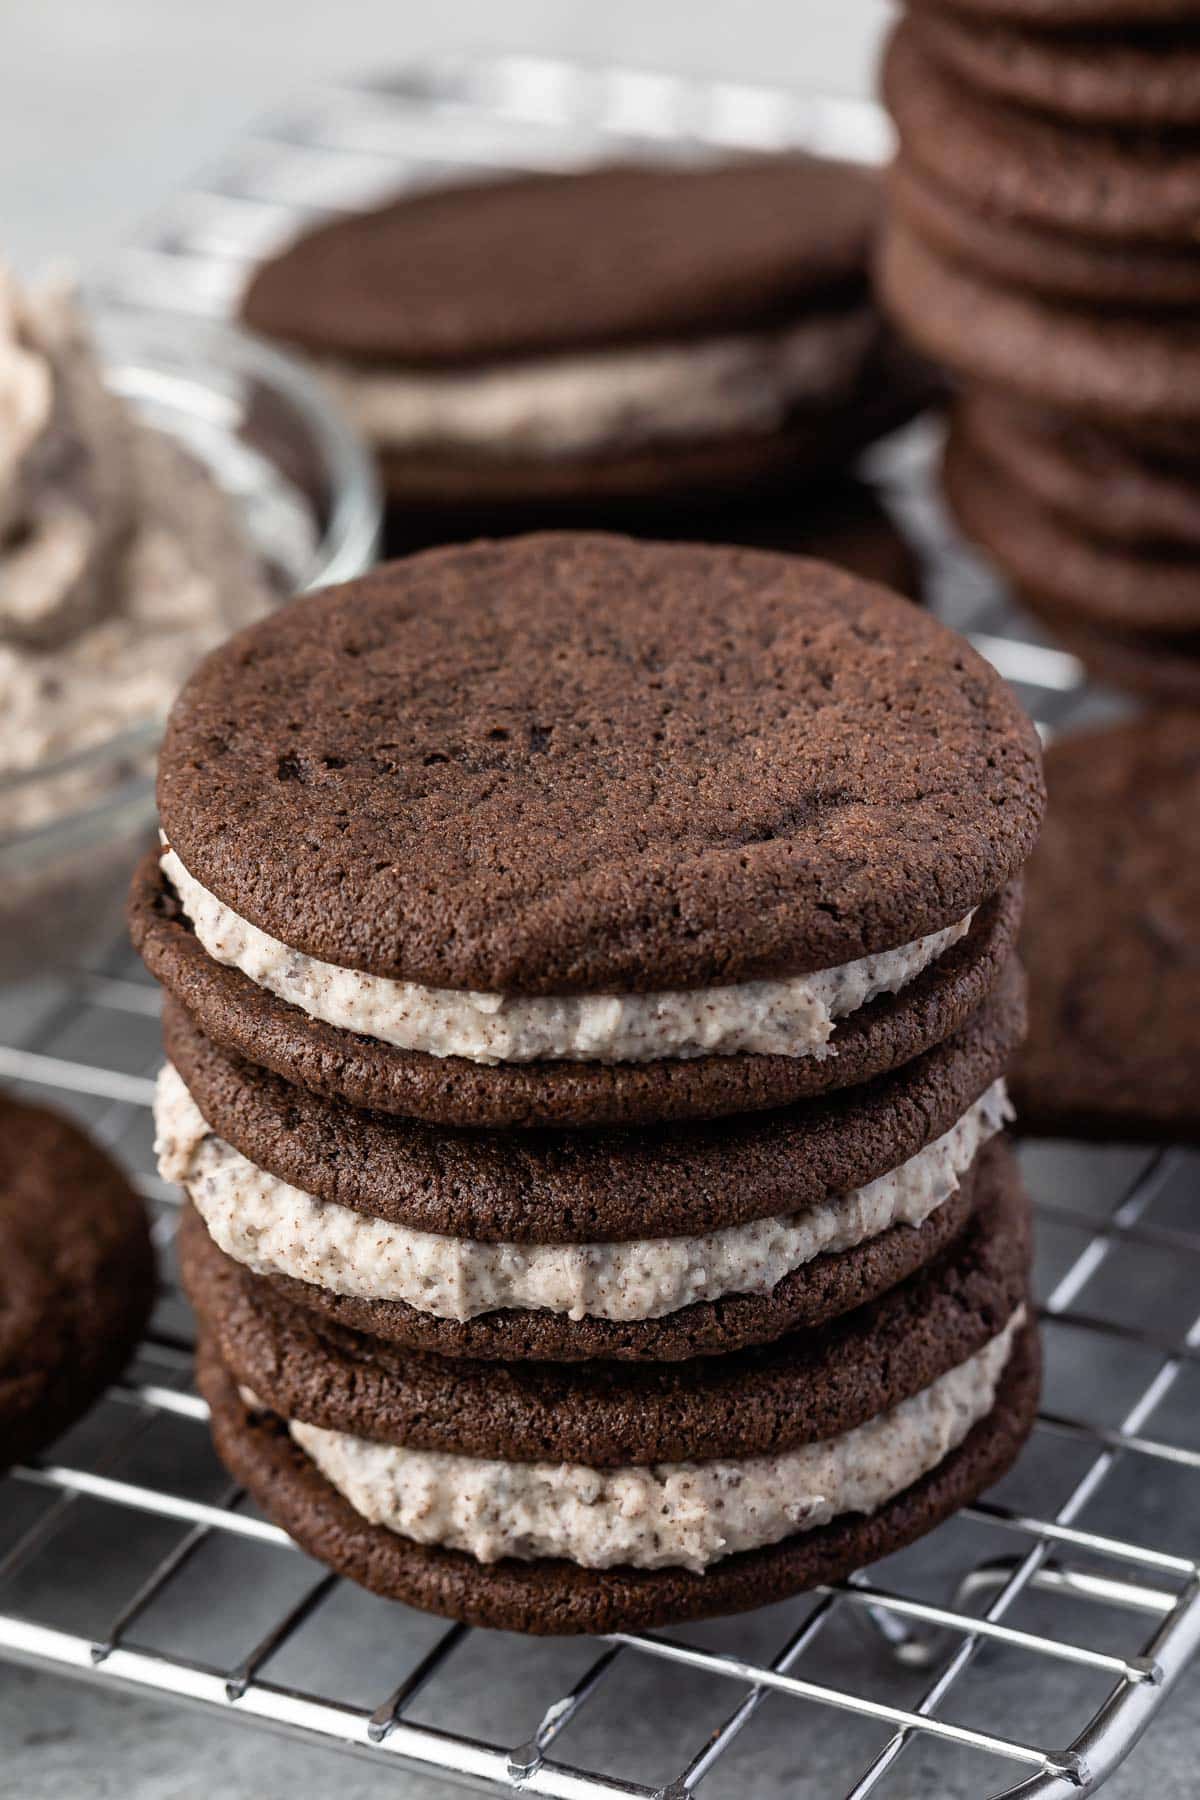 oreo cookies with cookies and cream filling.